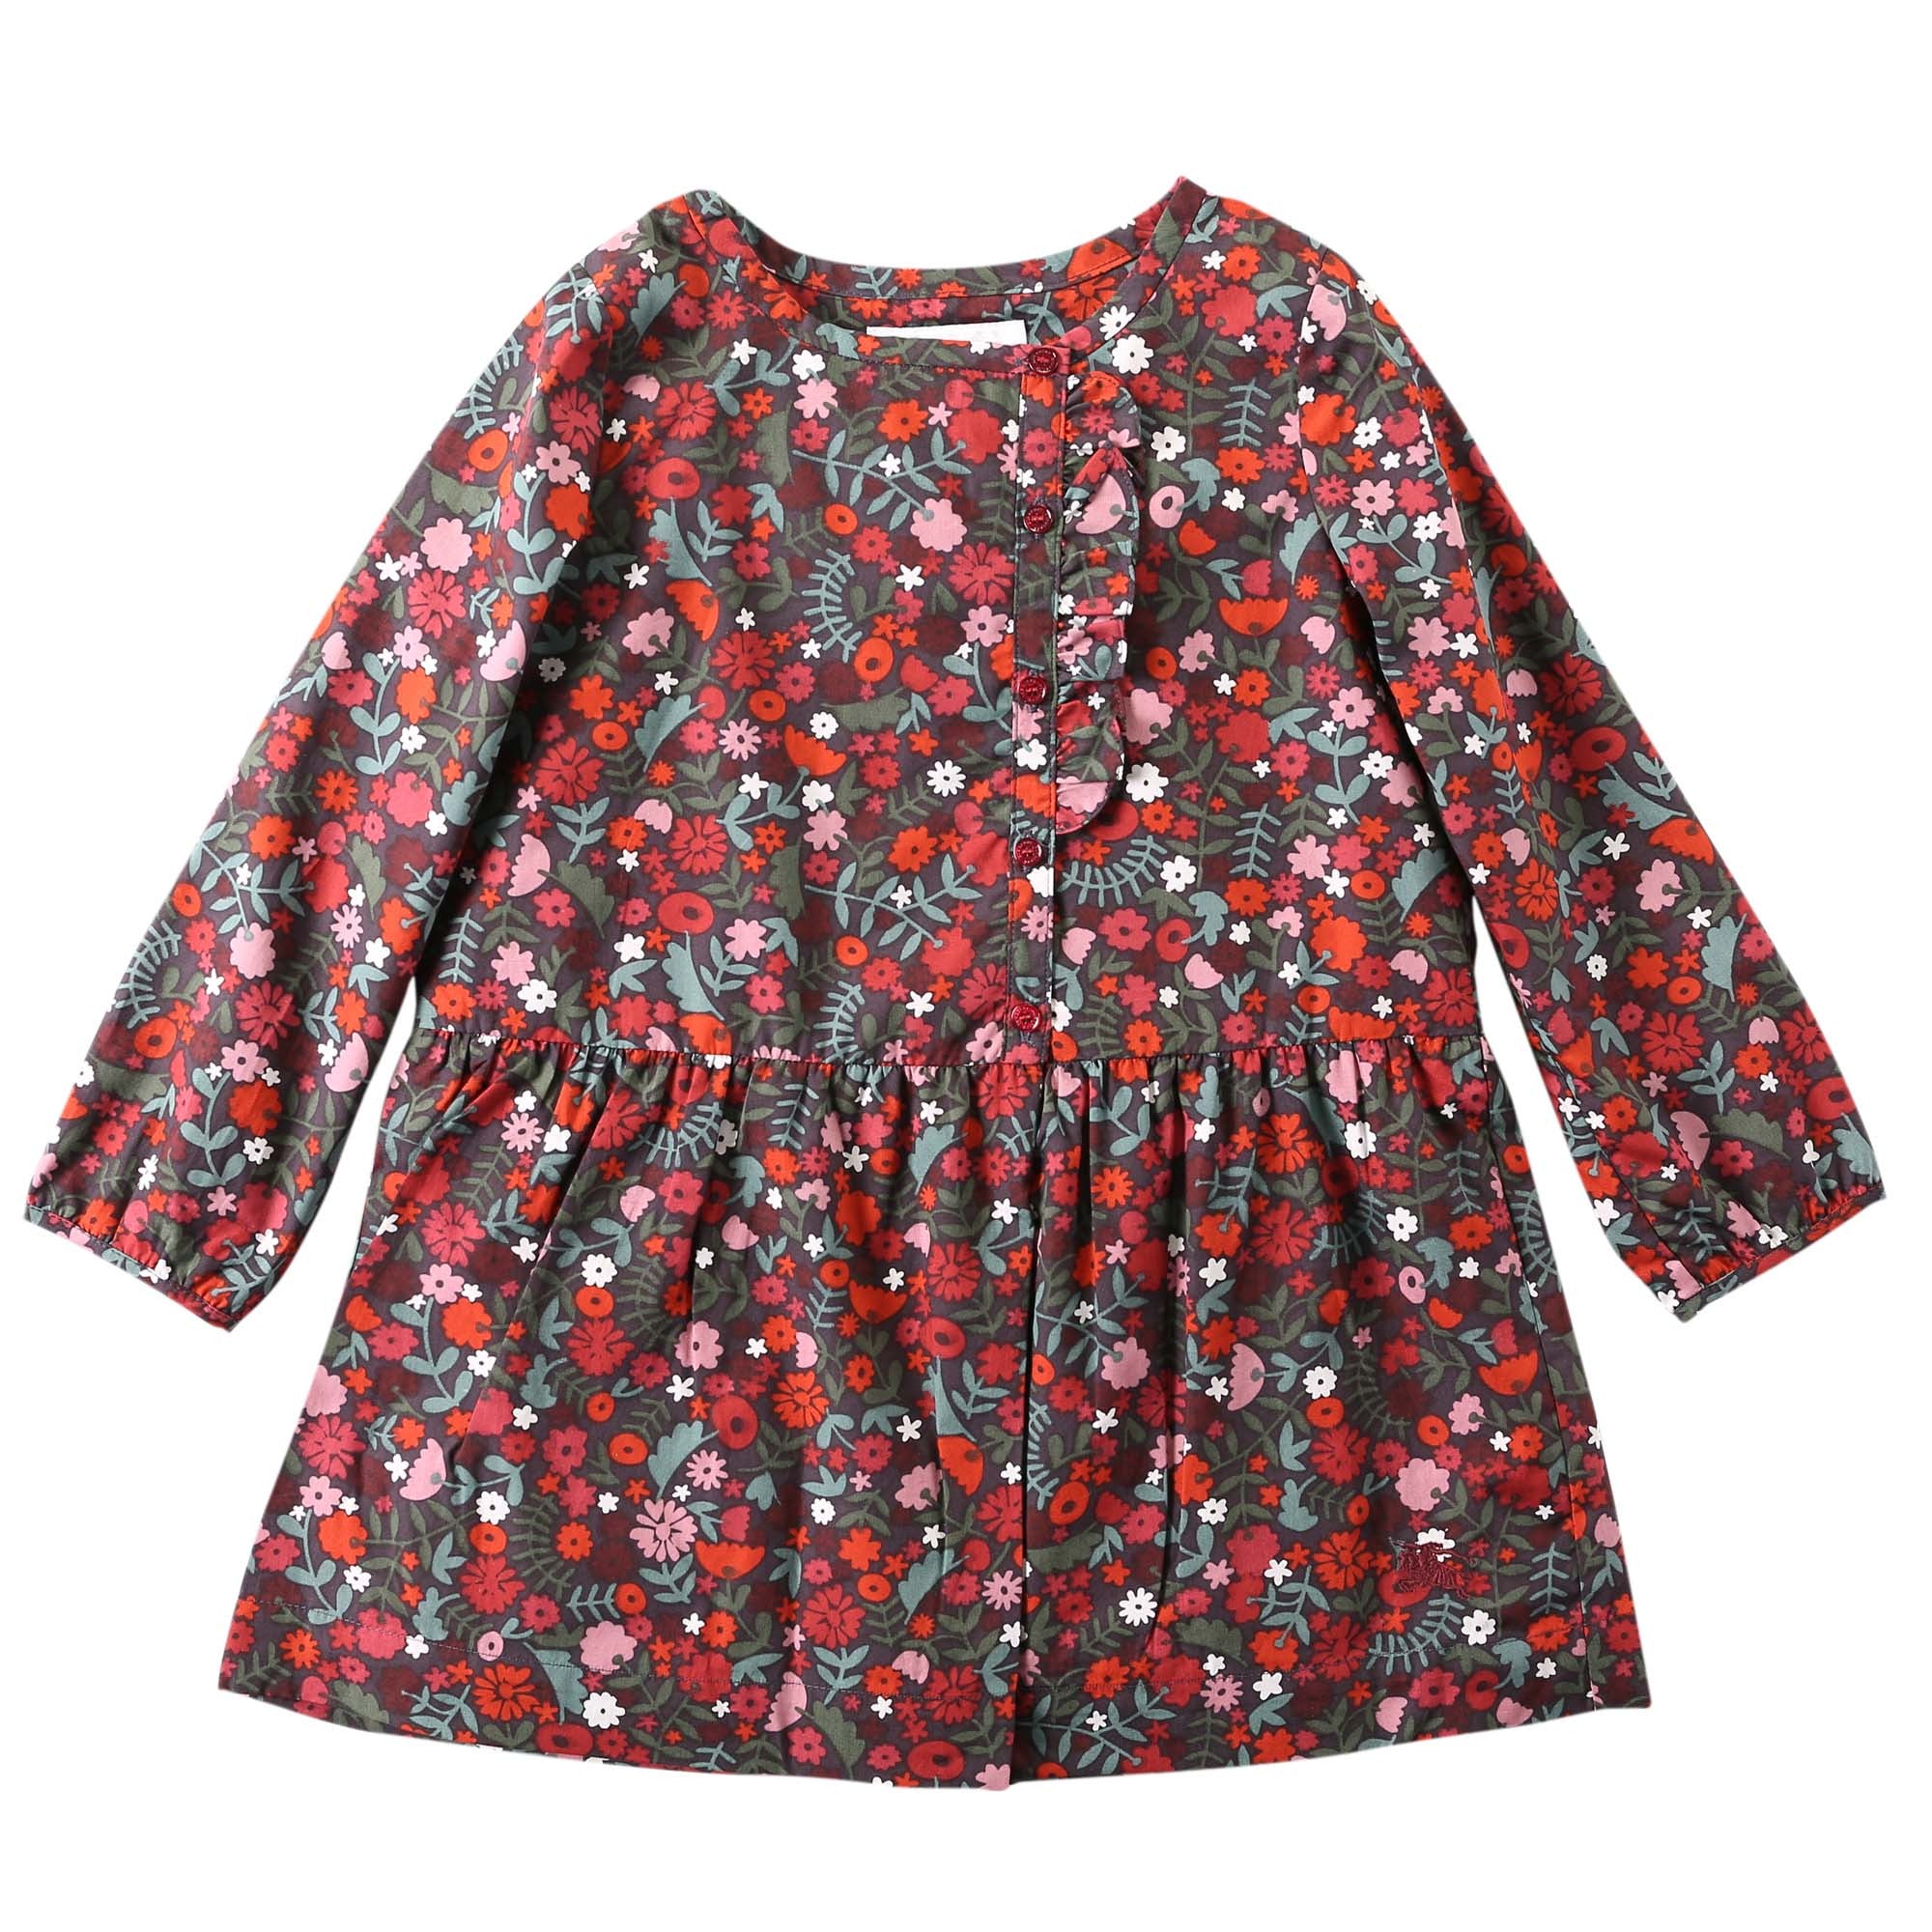 Baby Girls Antique Red Floral Printed Trims Dress - CÉMAROSE | Children's Fashion Store - 1